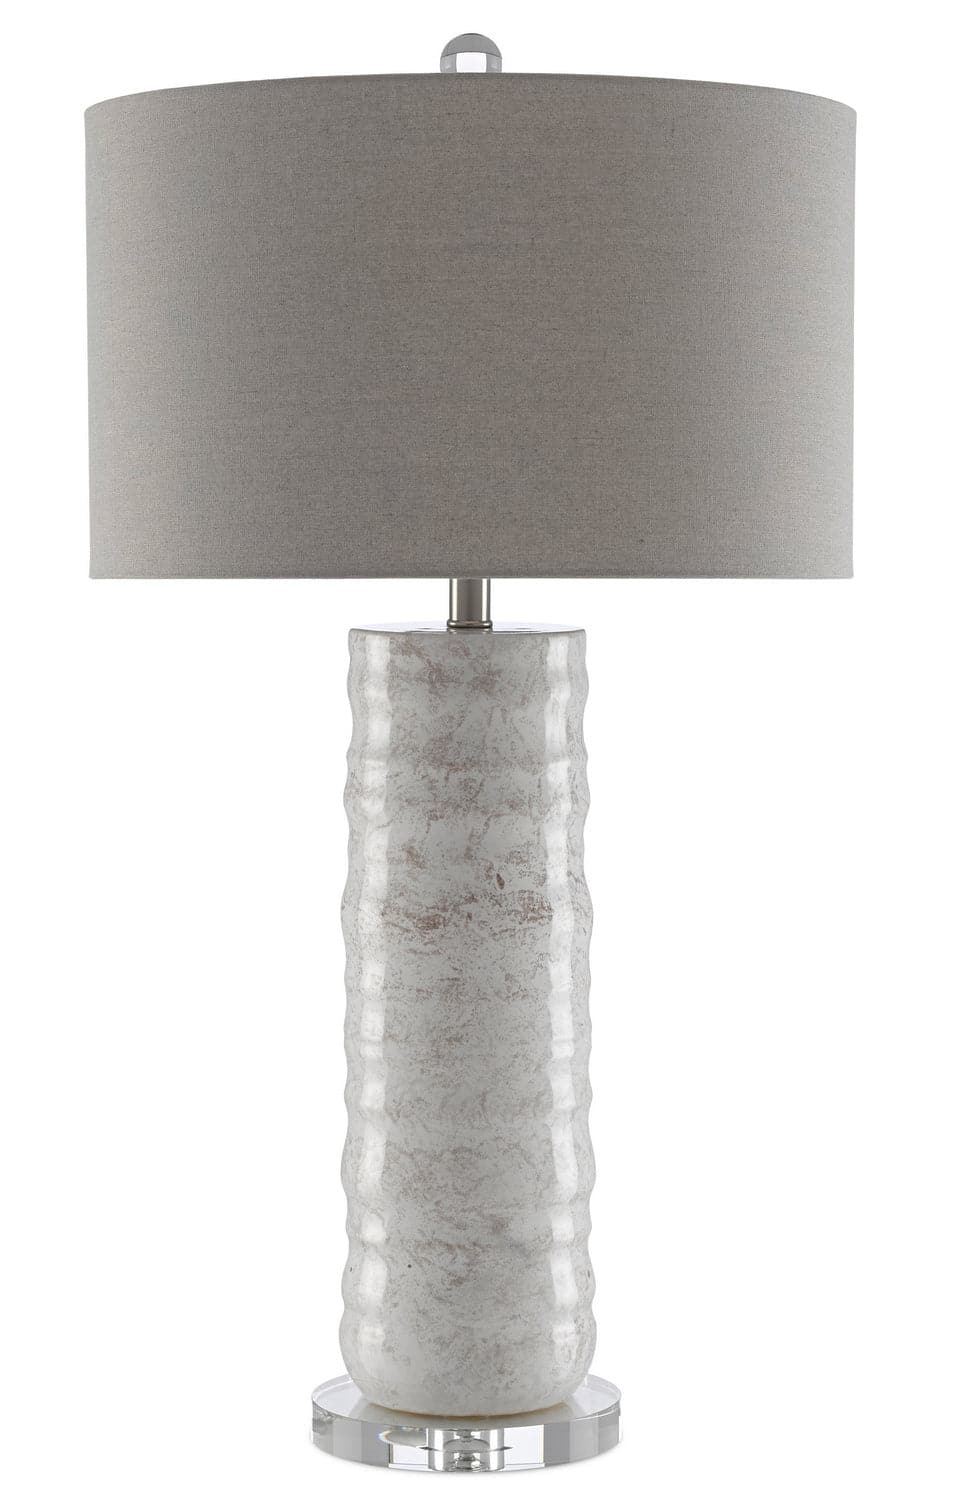 One Light Table Lamp from the Pila collection in Ivory/Taupe finish